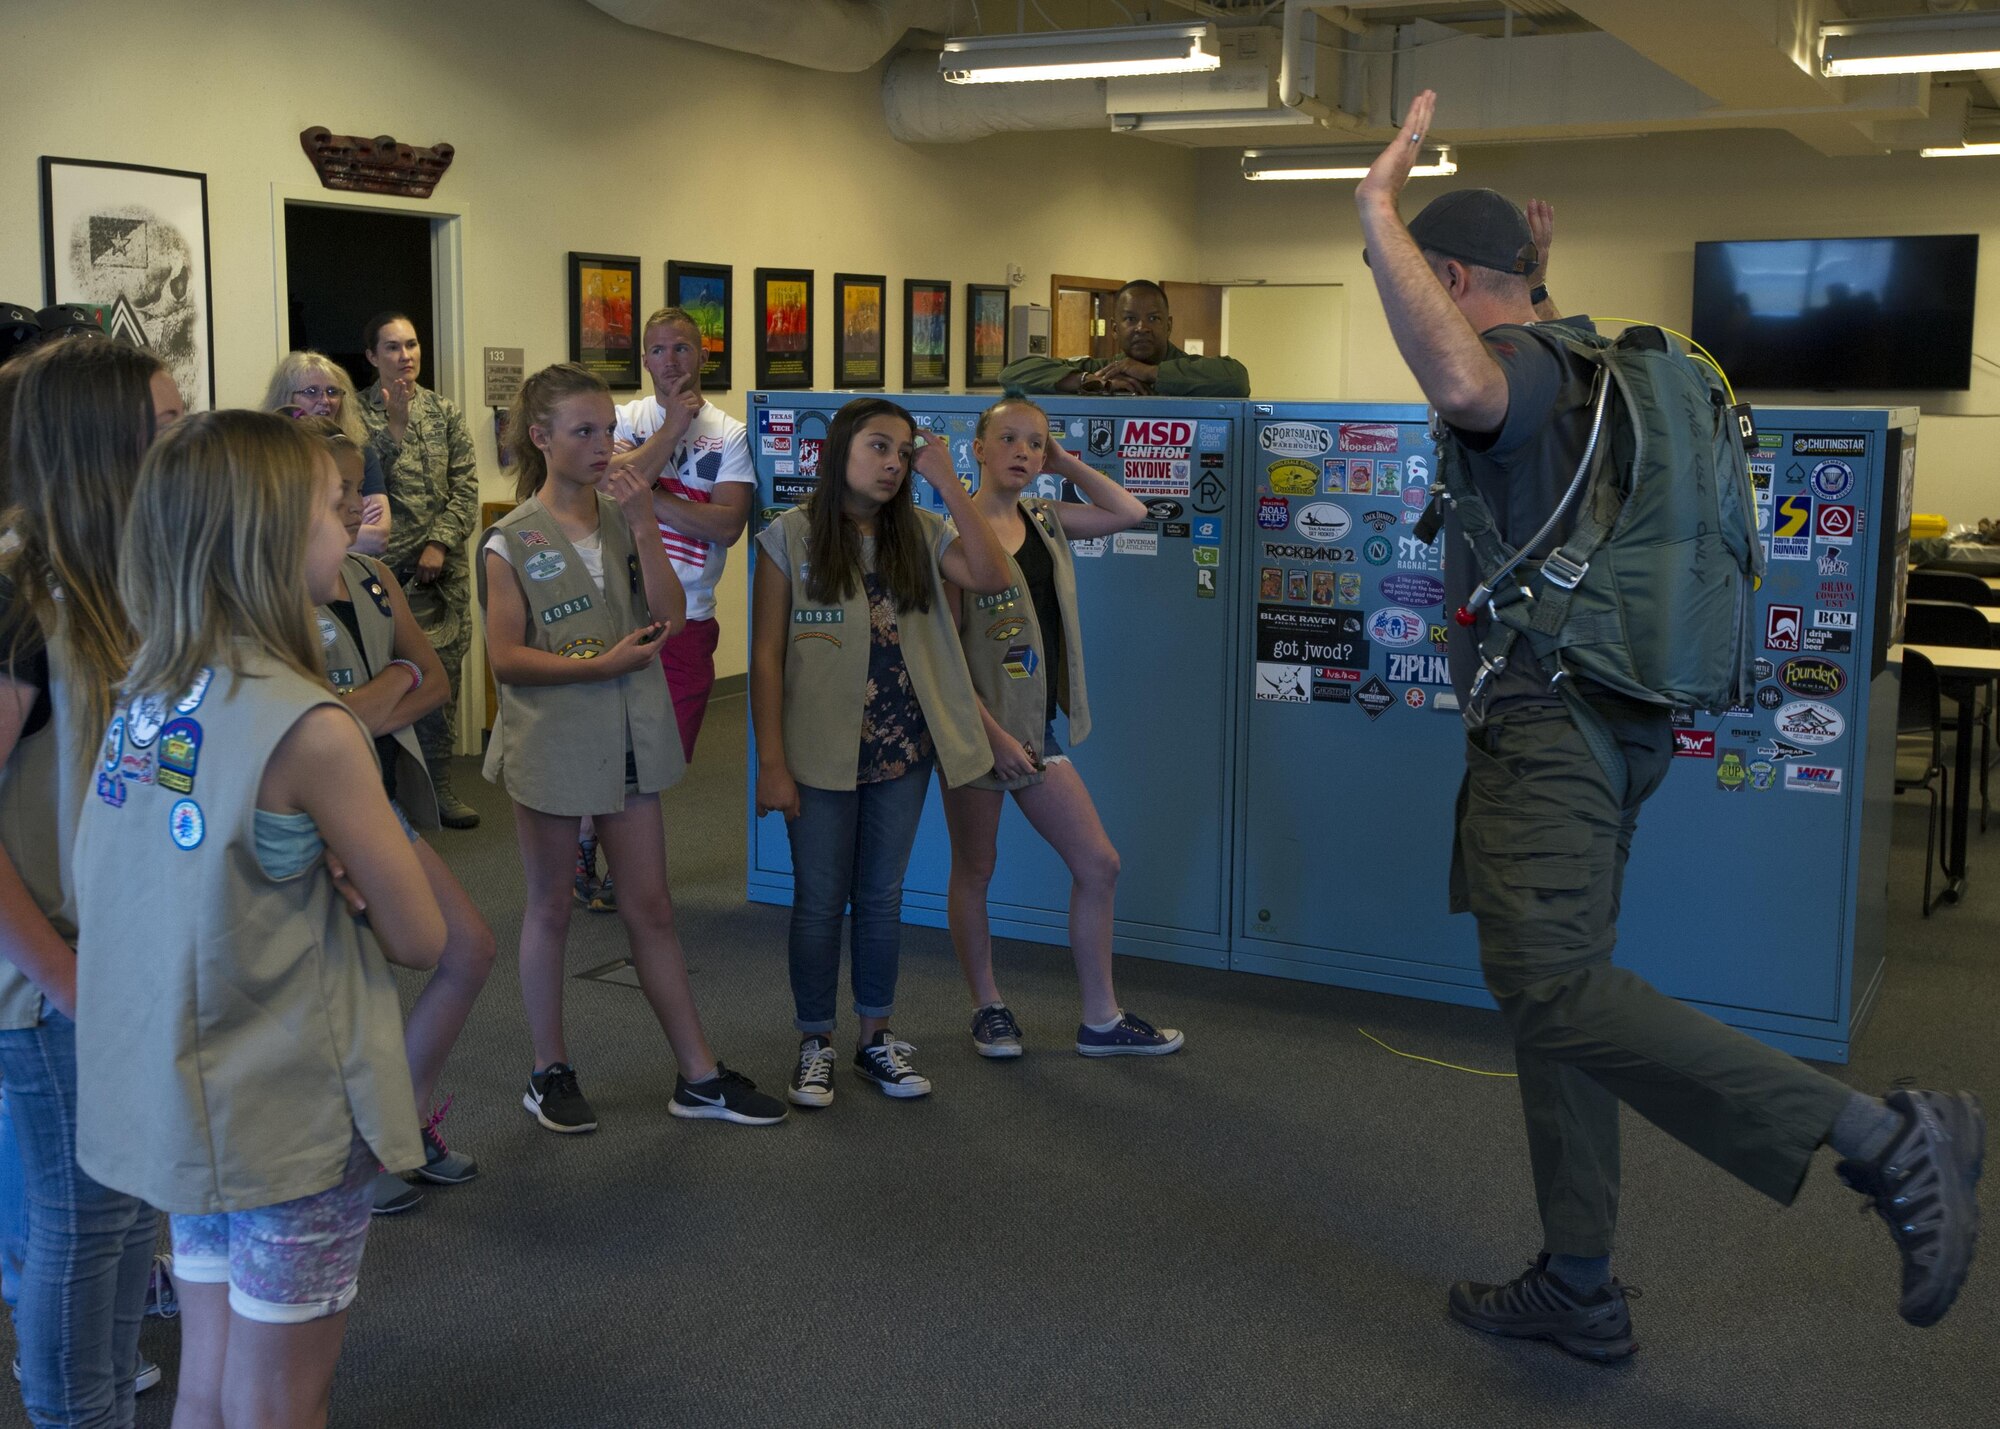 Staff Sgt. David Bowden, a Survival, Evasion, Resistance and Escape, instructor assigned to the 62nd Operations Support Squadron, discusses parachuting with several Girl Scouts July 9, 2017, at McChord Field. During the visit, seven girl scouts were able to tour the 446th AW, a C-17, control tower, and learned SERE survival tips. (U.S. Air Force photo by Tech. Sgt. Bryan Hull)